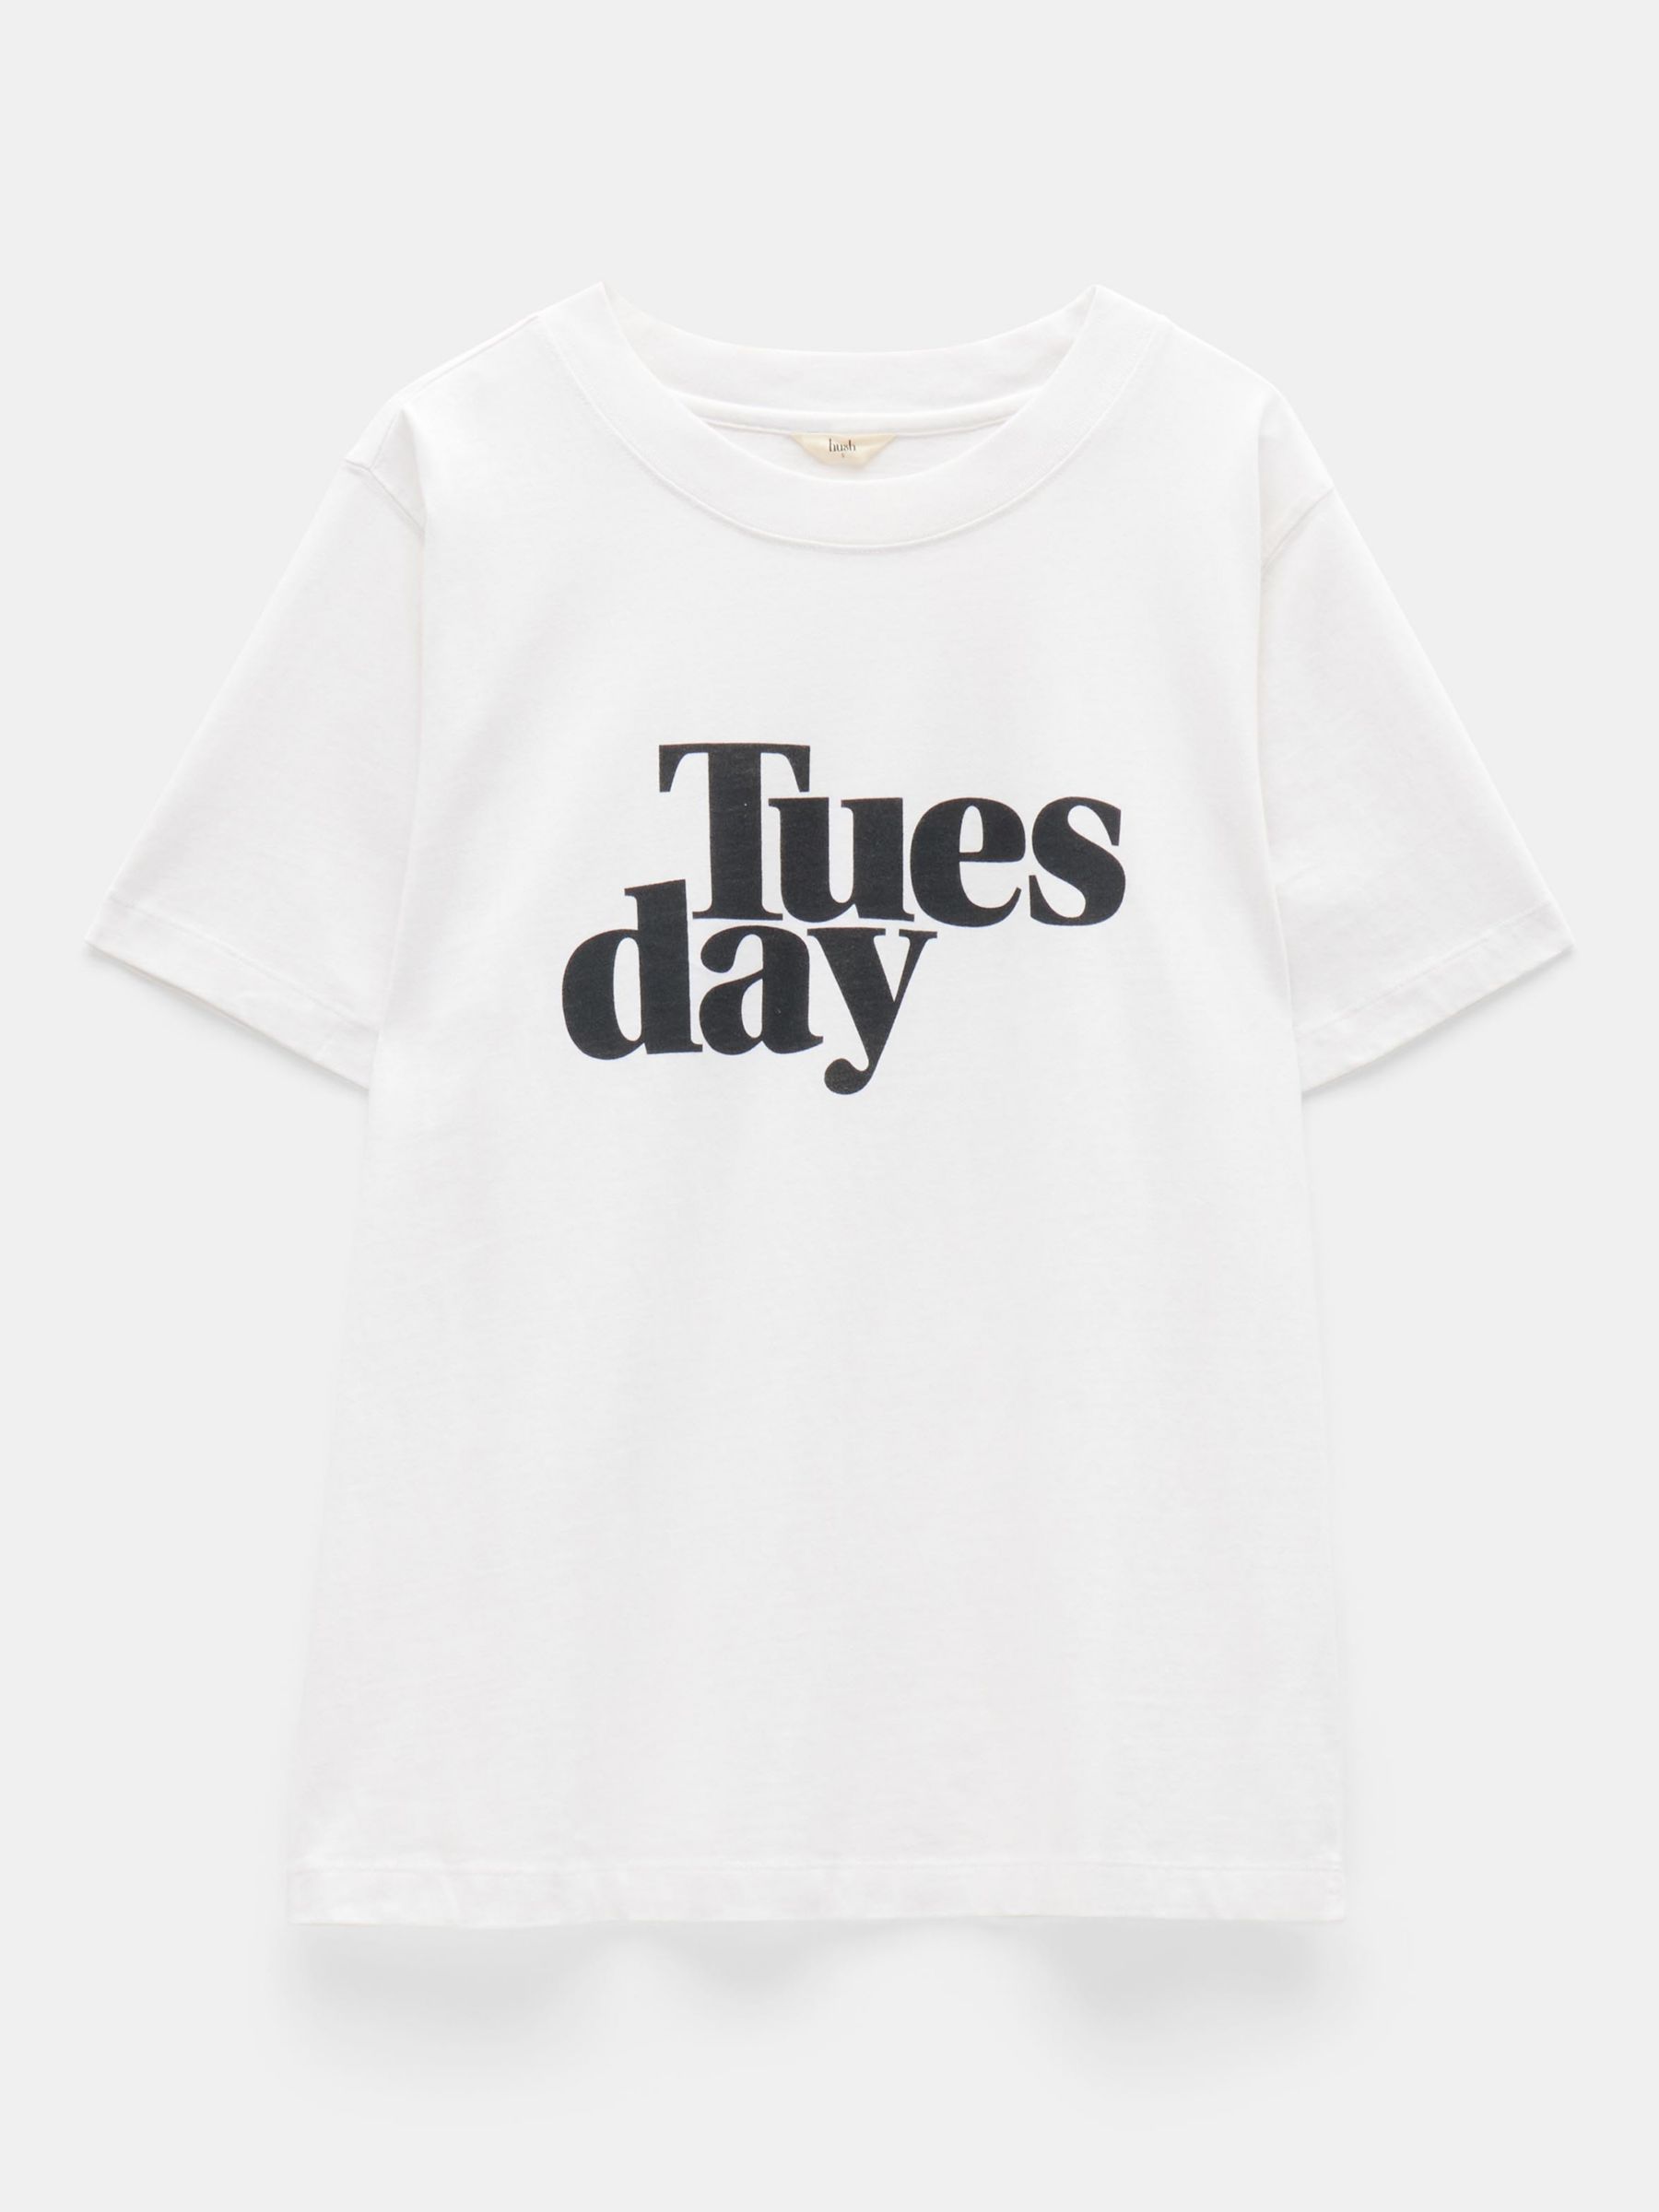 Buy HUSH Tuesday Graphic Cotton T-shirt, White Online at johnlewis.com